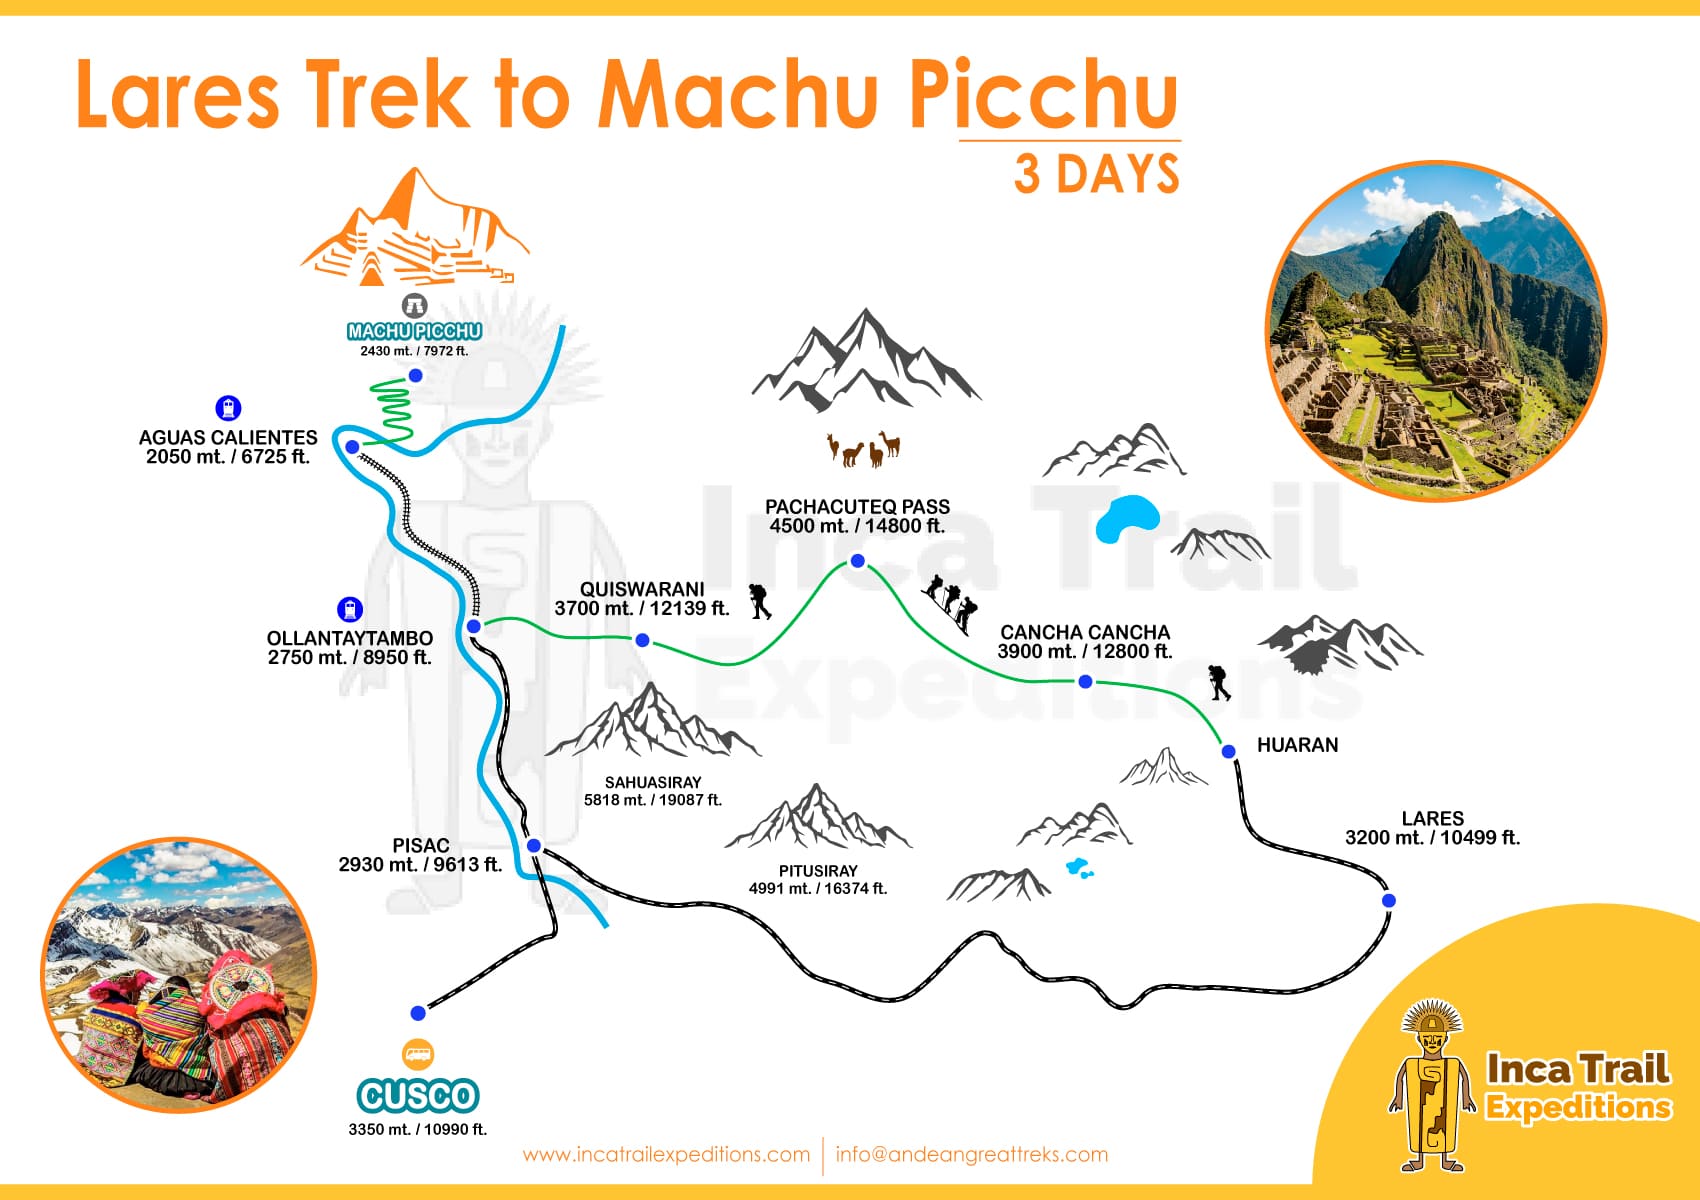 LARES-TREK-TO-MACHU-PICCHU-3-DAYS-BY-INCA-TRAIL-EXPEDITIONS